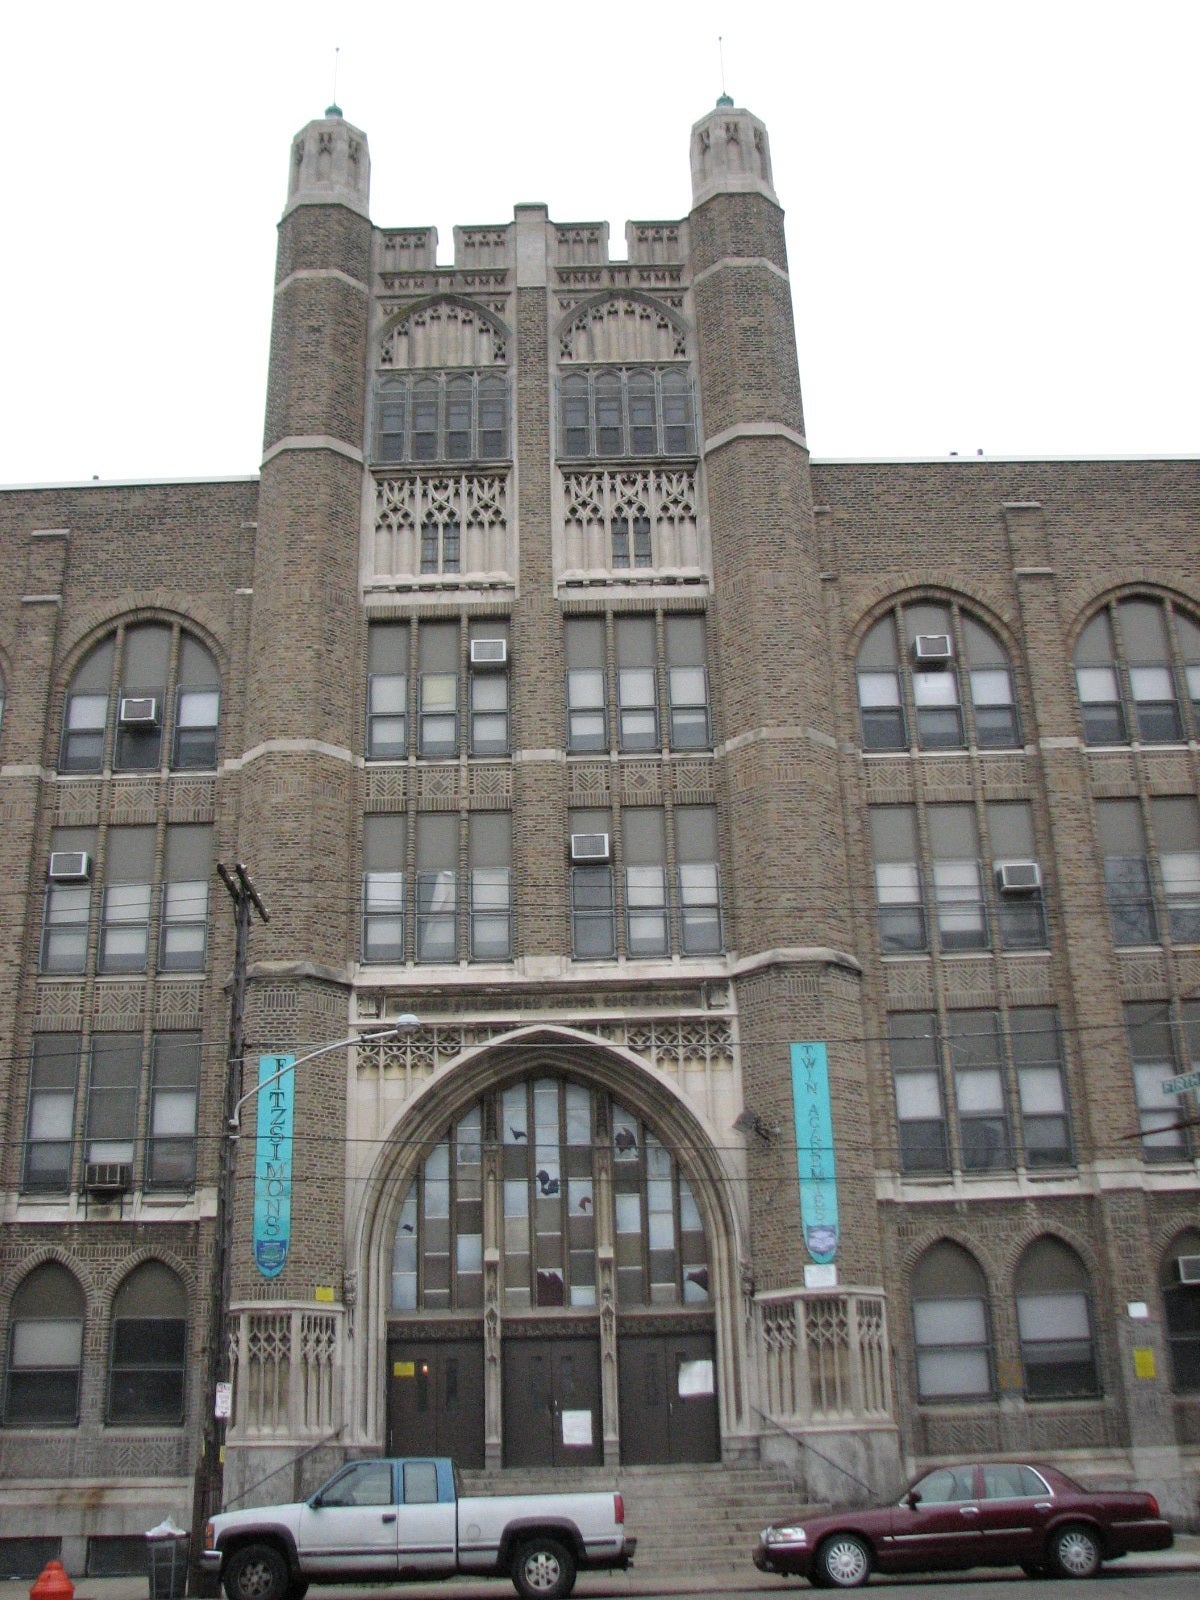 The entrance tower of Fitzsimons Middle School, 2601 West Cumberland Street.